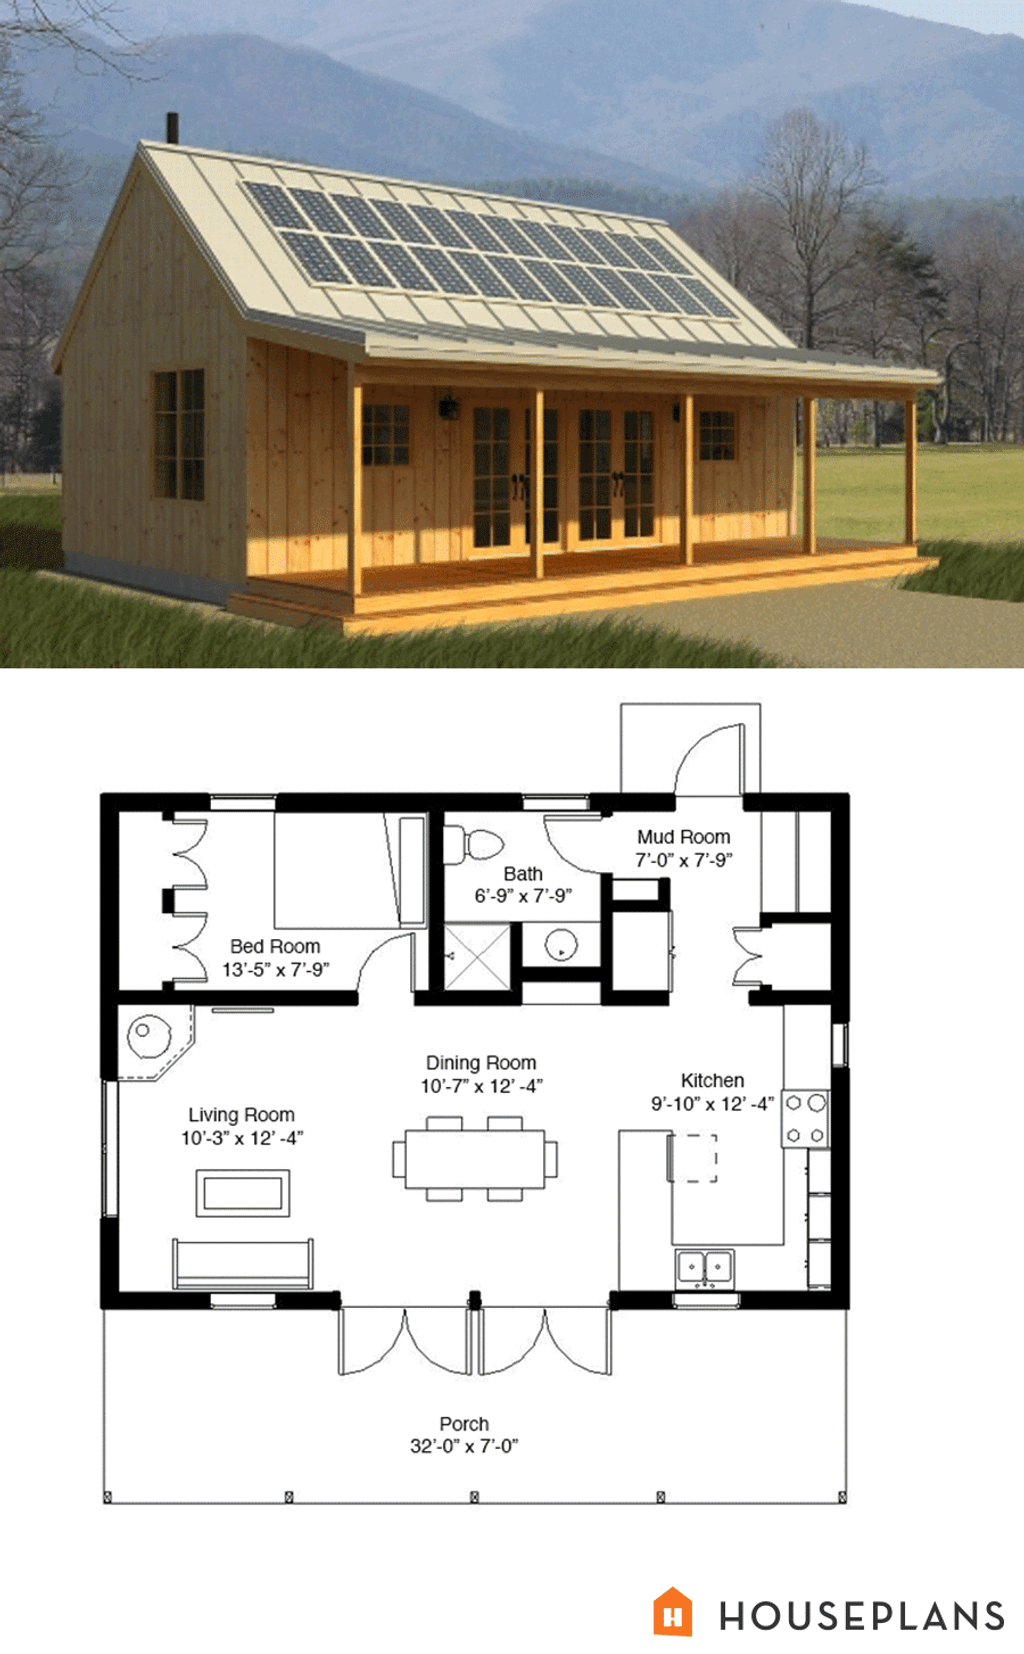 Cabin Style House Plan 1 Beds 1 Baths 704 Sq Ft Plan 497 14 Dreamhomesource Com